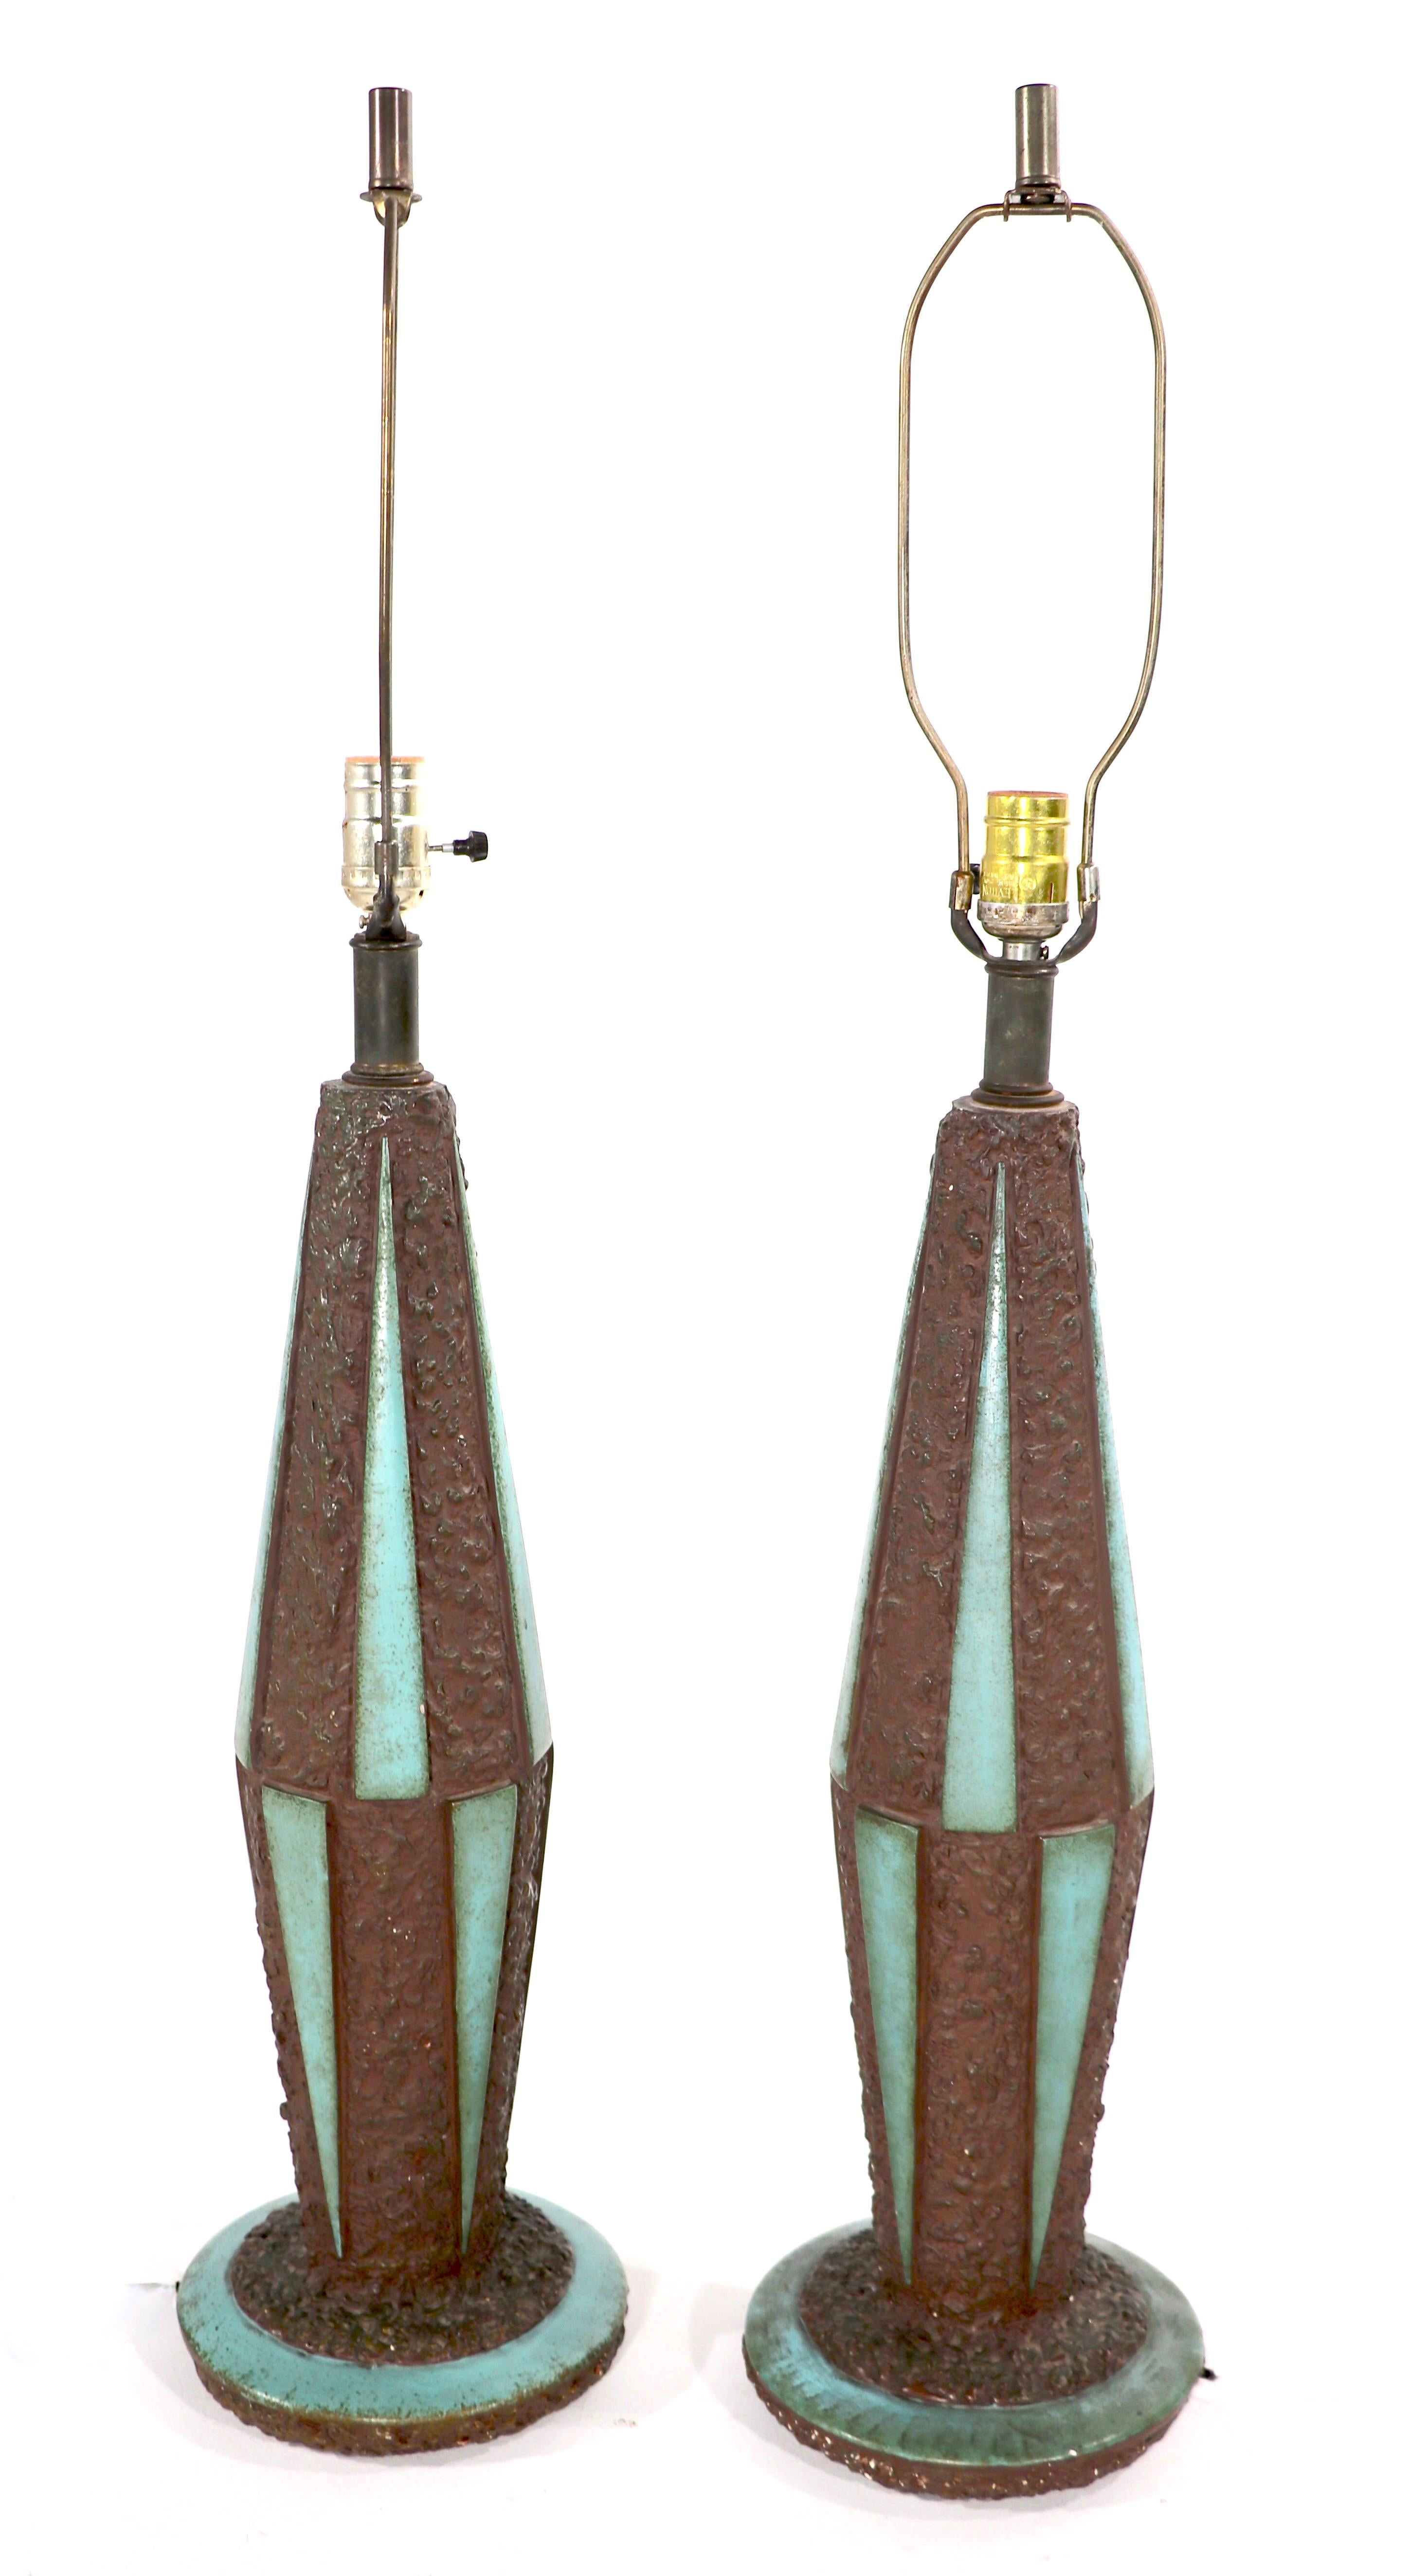 Stylish pair of Mid-Century table lamps having textured ceramic surfaces with smooth glaze triangular panels. The textured ground is a bronze / brown tone, the triangular panels are turquoise in color Both are in good original working condition,